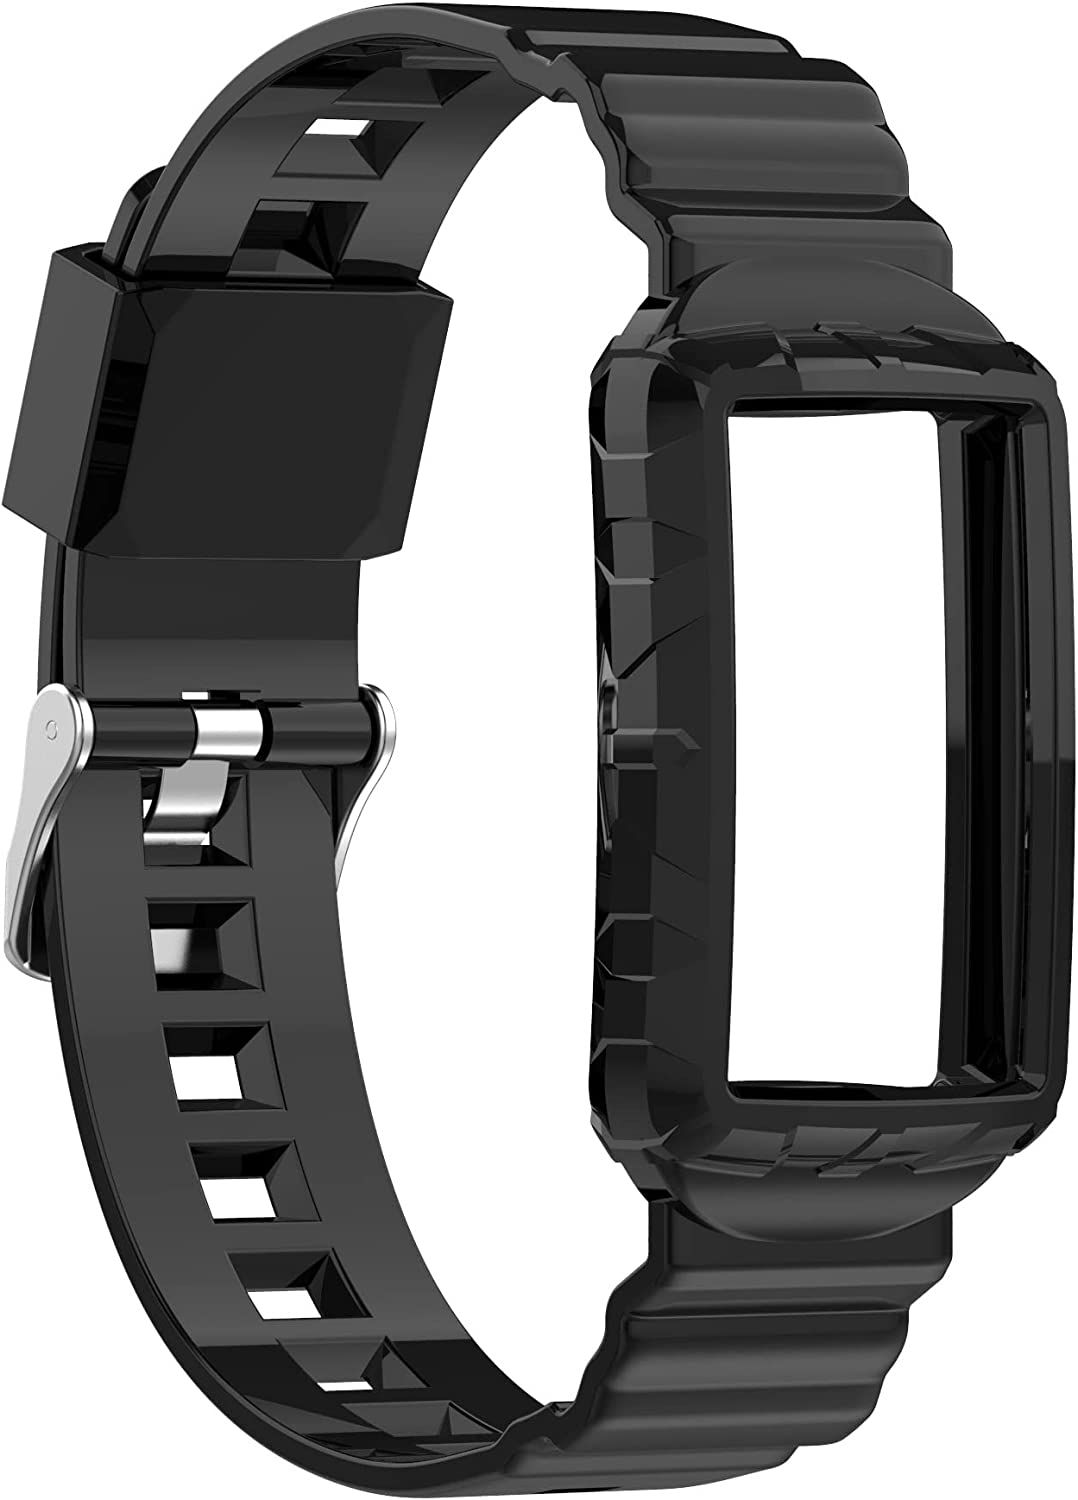 Solved: Fitbit Charge 4 Replacement Strap Band Clip Holder... - Fitbit ...